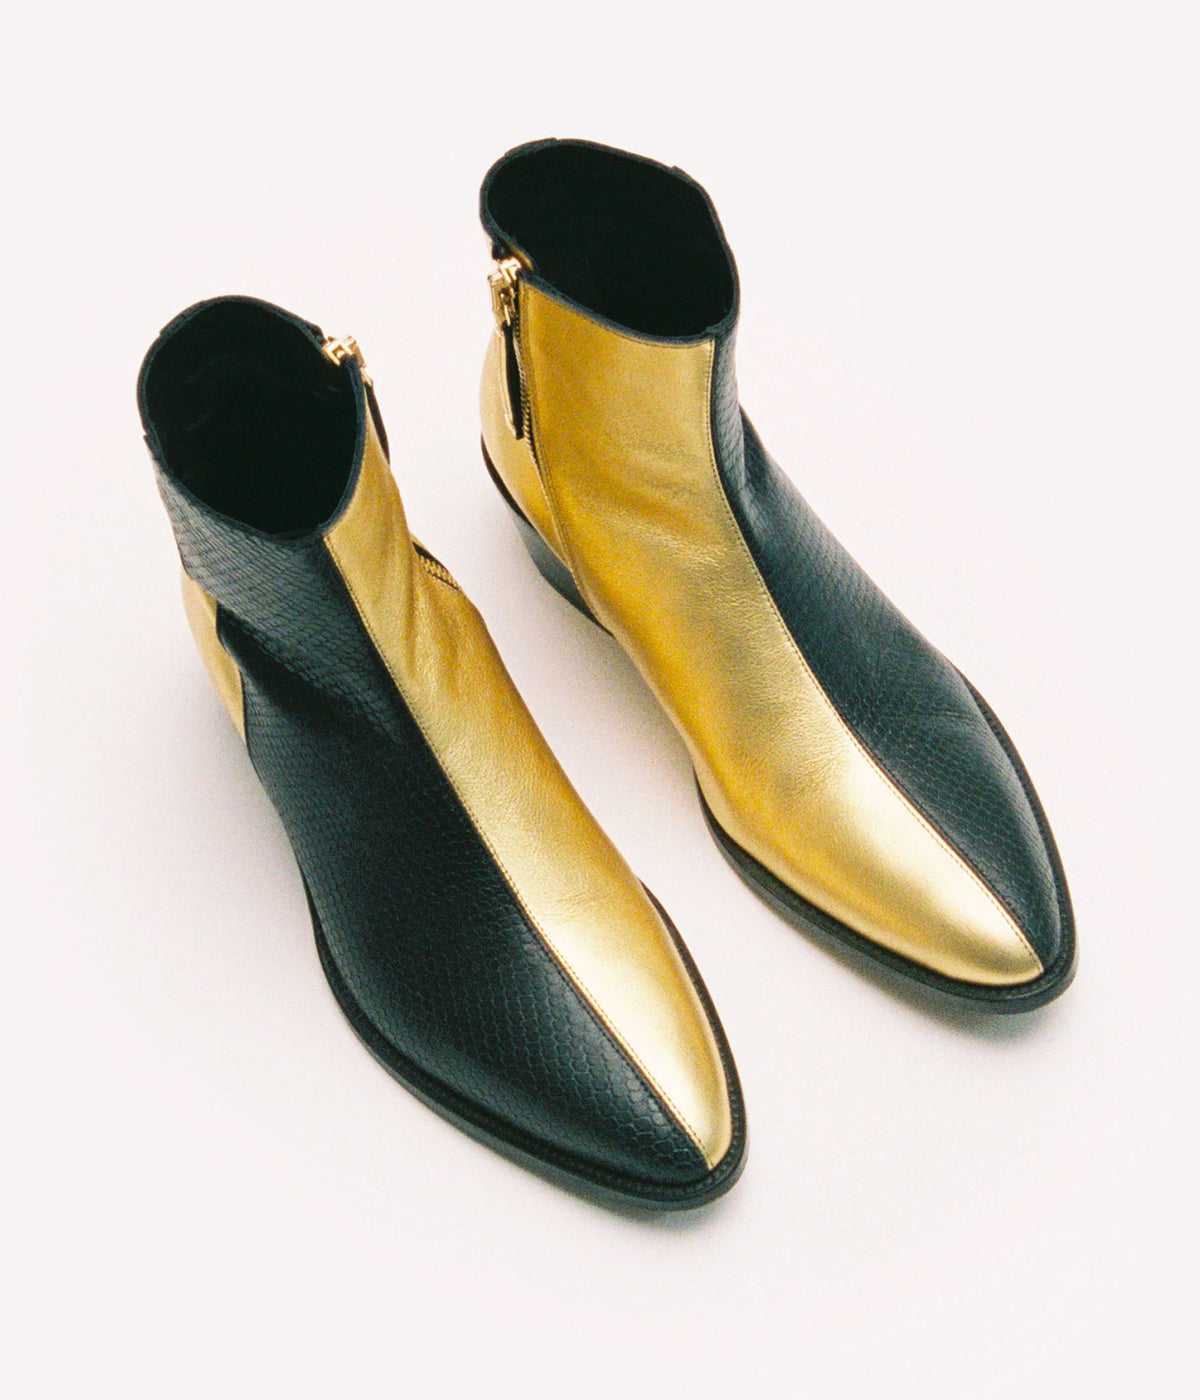 LUTHER BOOT BLACK / GOLD